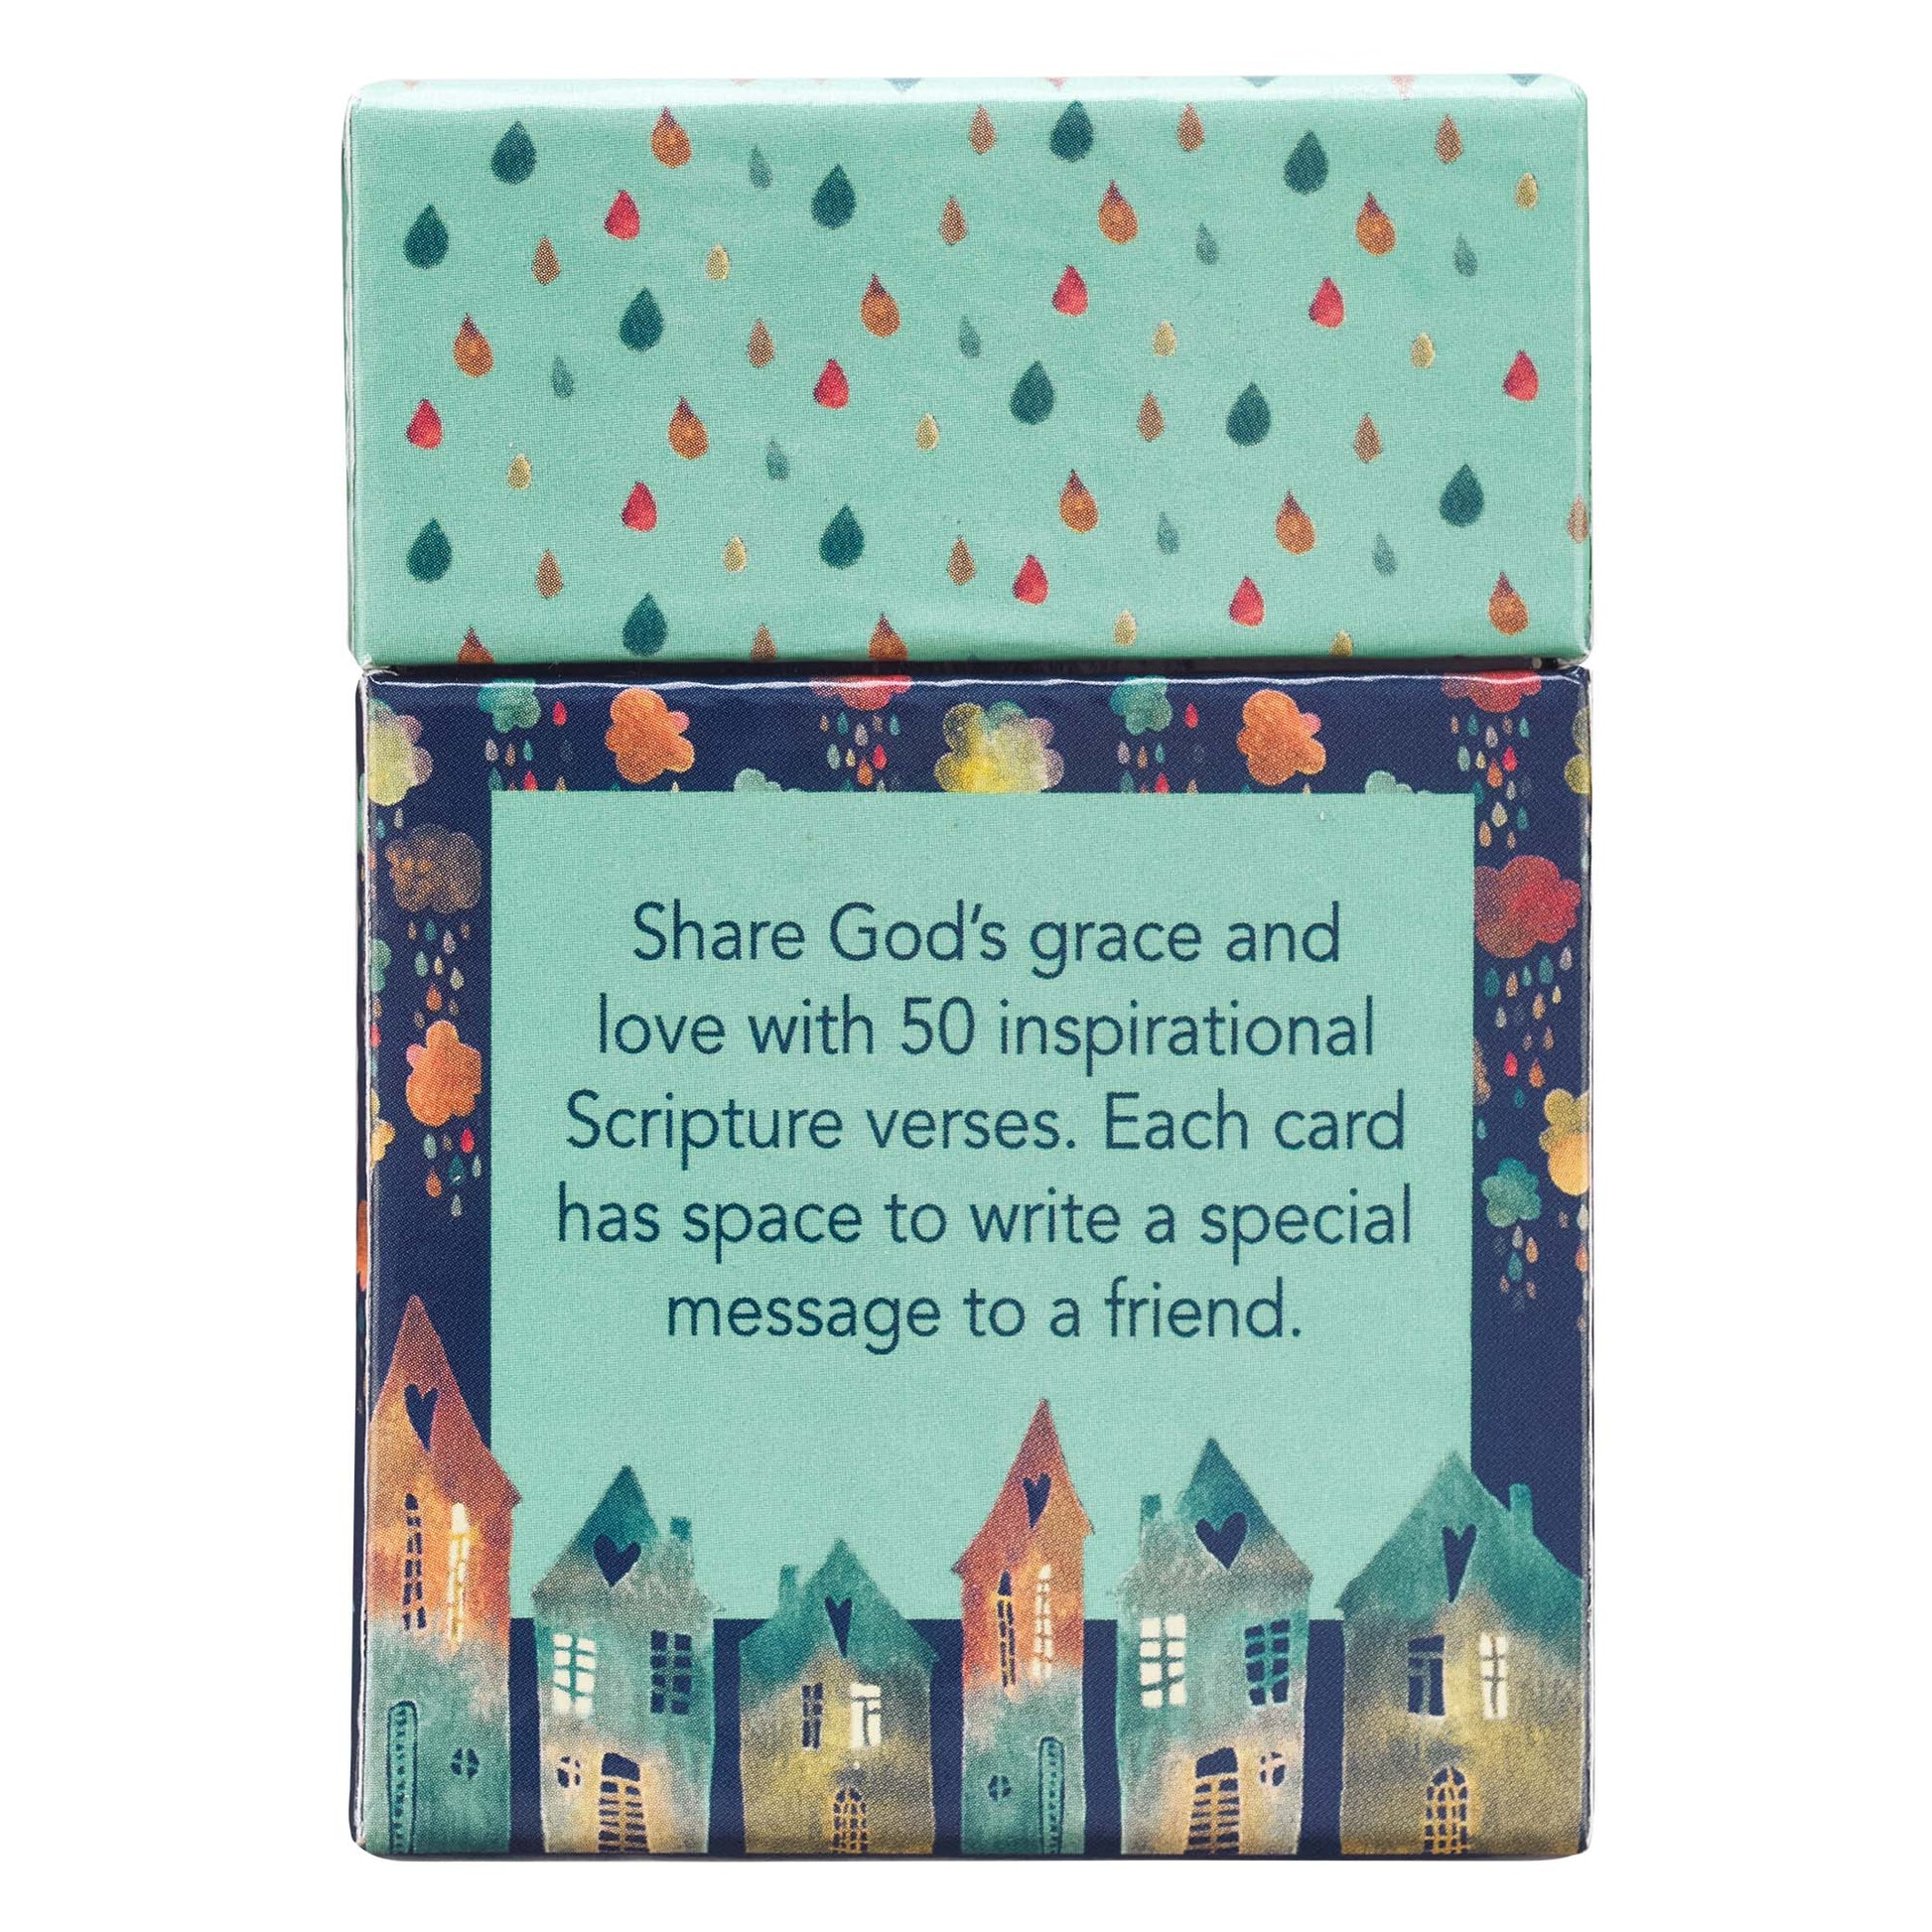 Grace for Each Day Box of Blessings - The Christian Gift Company